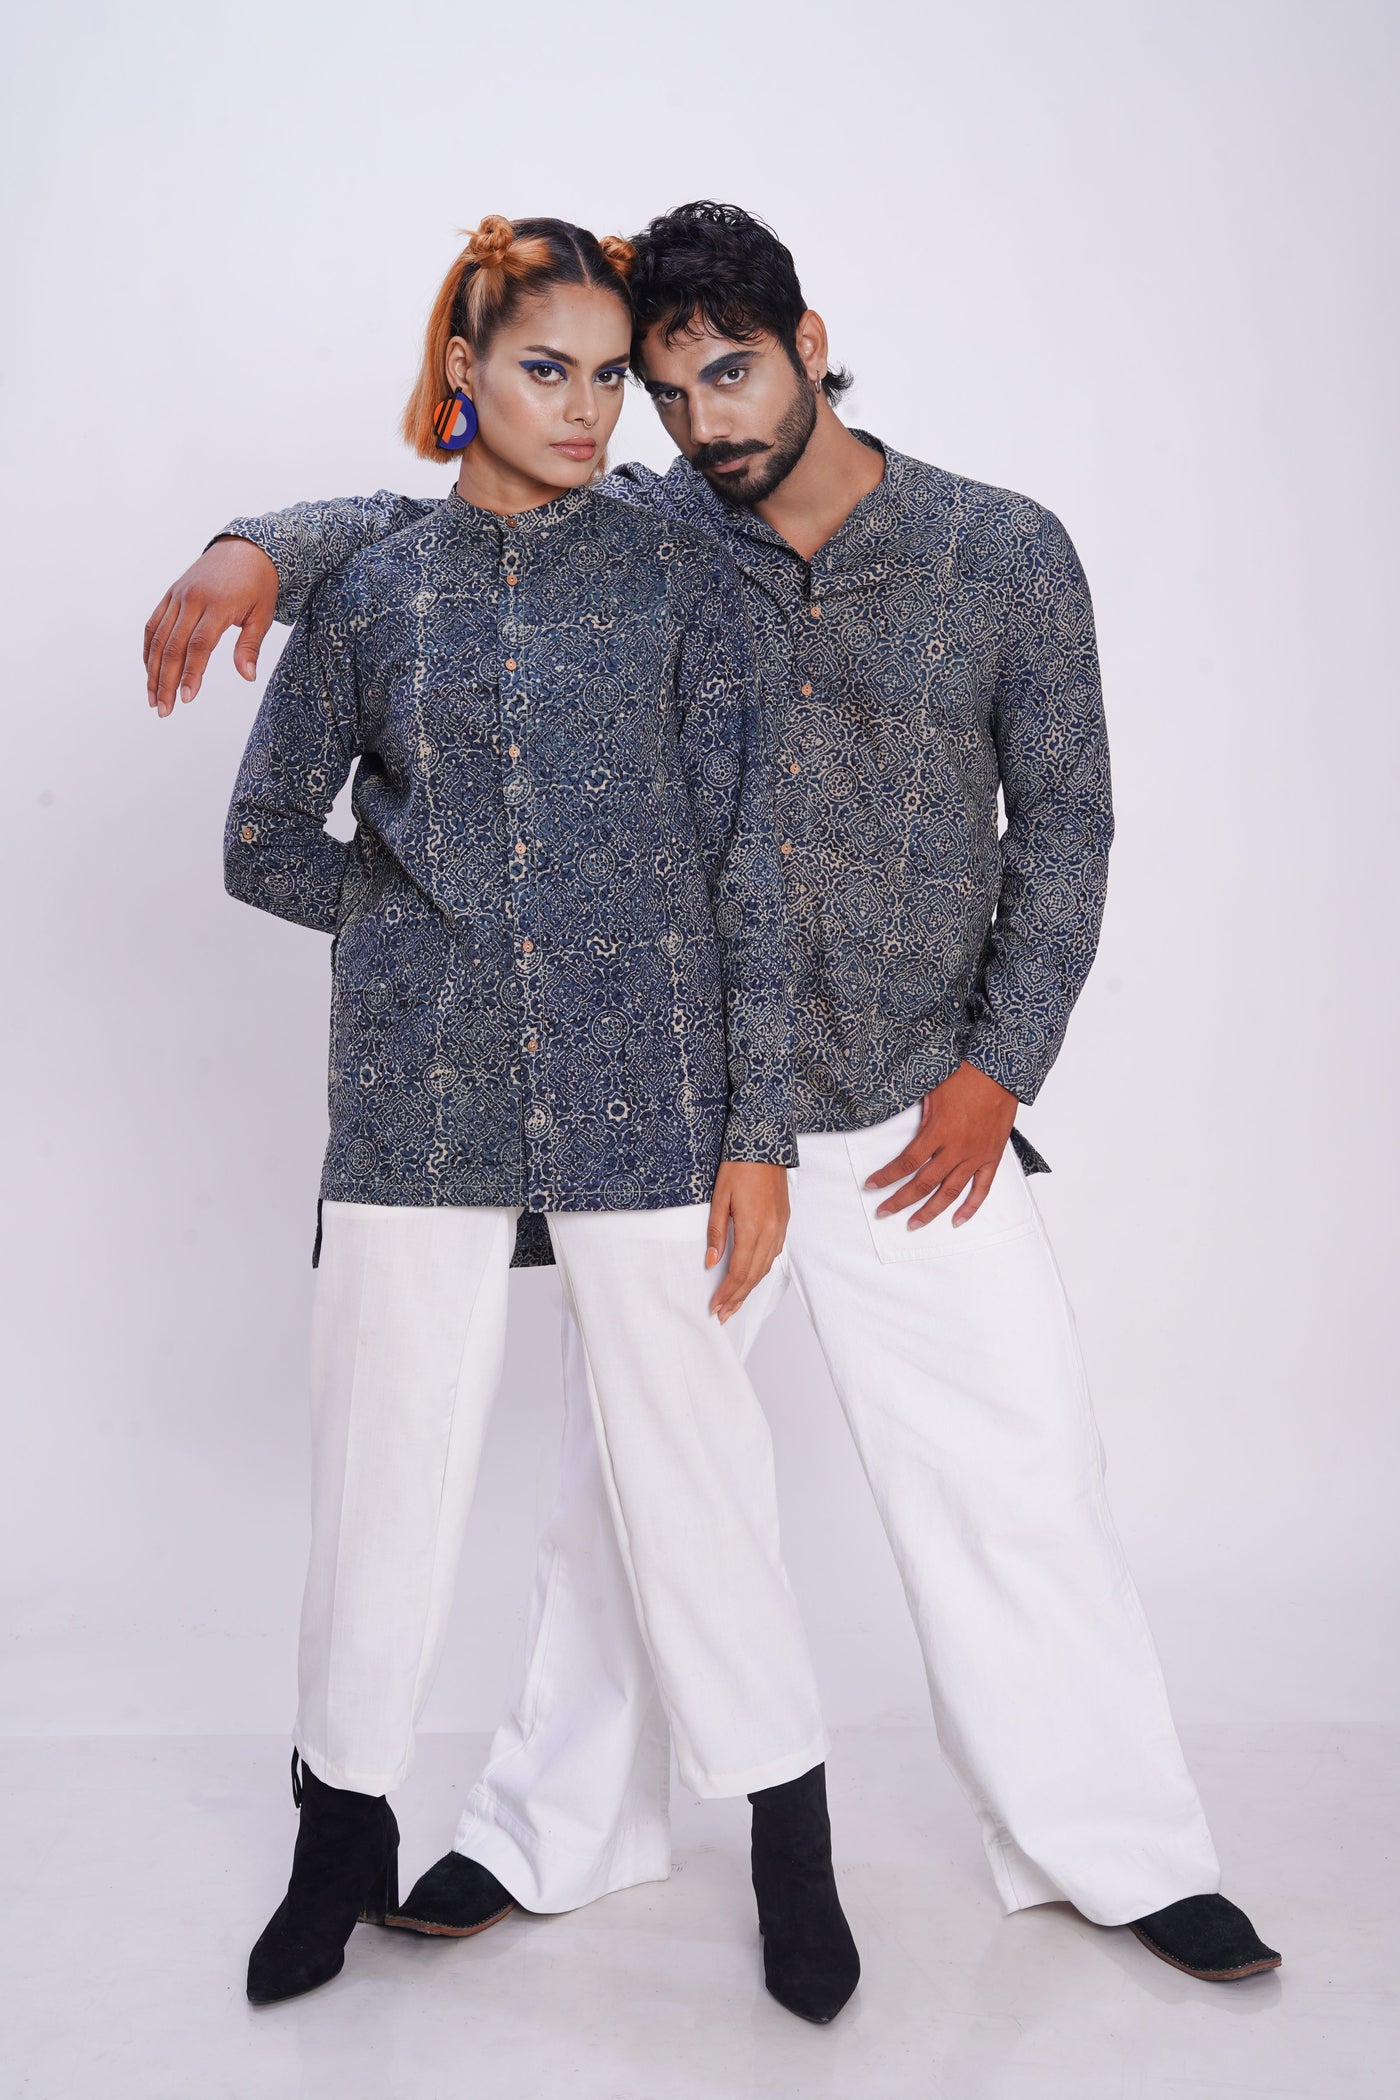 Hand block printed silver lining reliable shirt for women